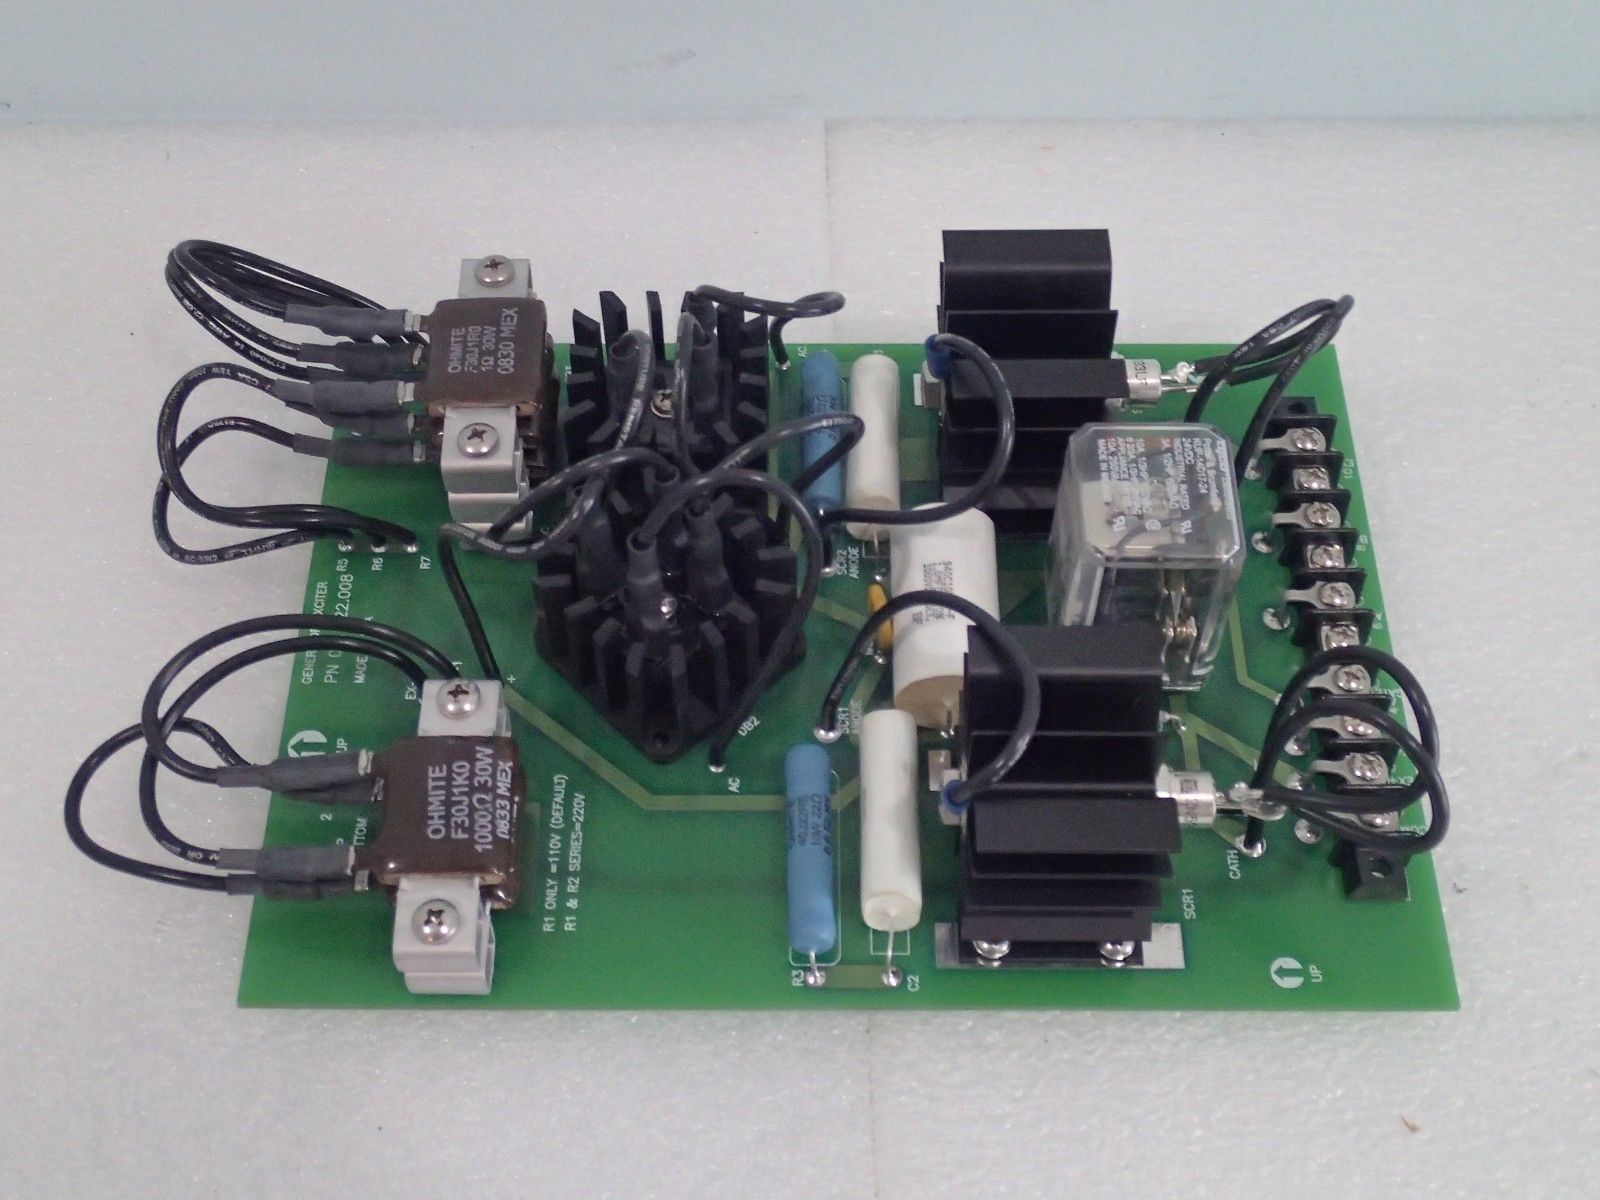 NEW GE 001.022.008 GENERATOR EXCITER BOARD GENERAL ELECTRIC - $534.60